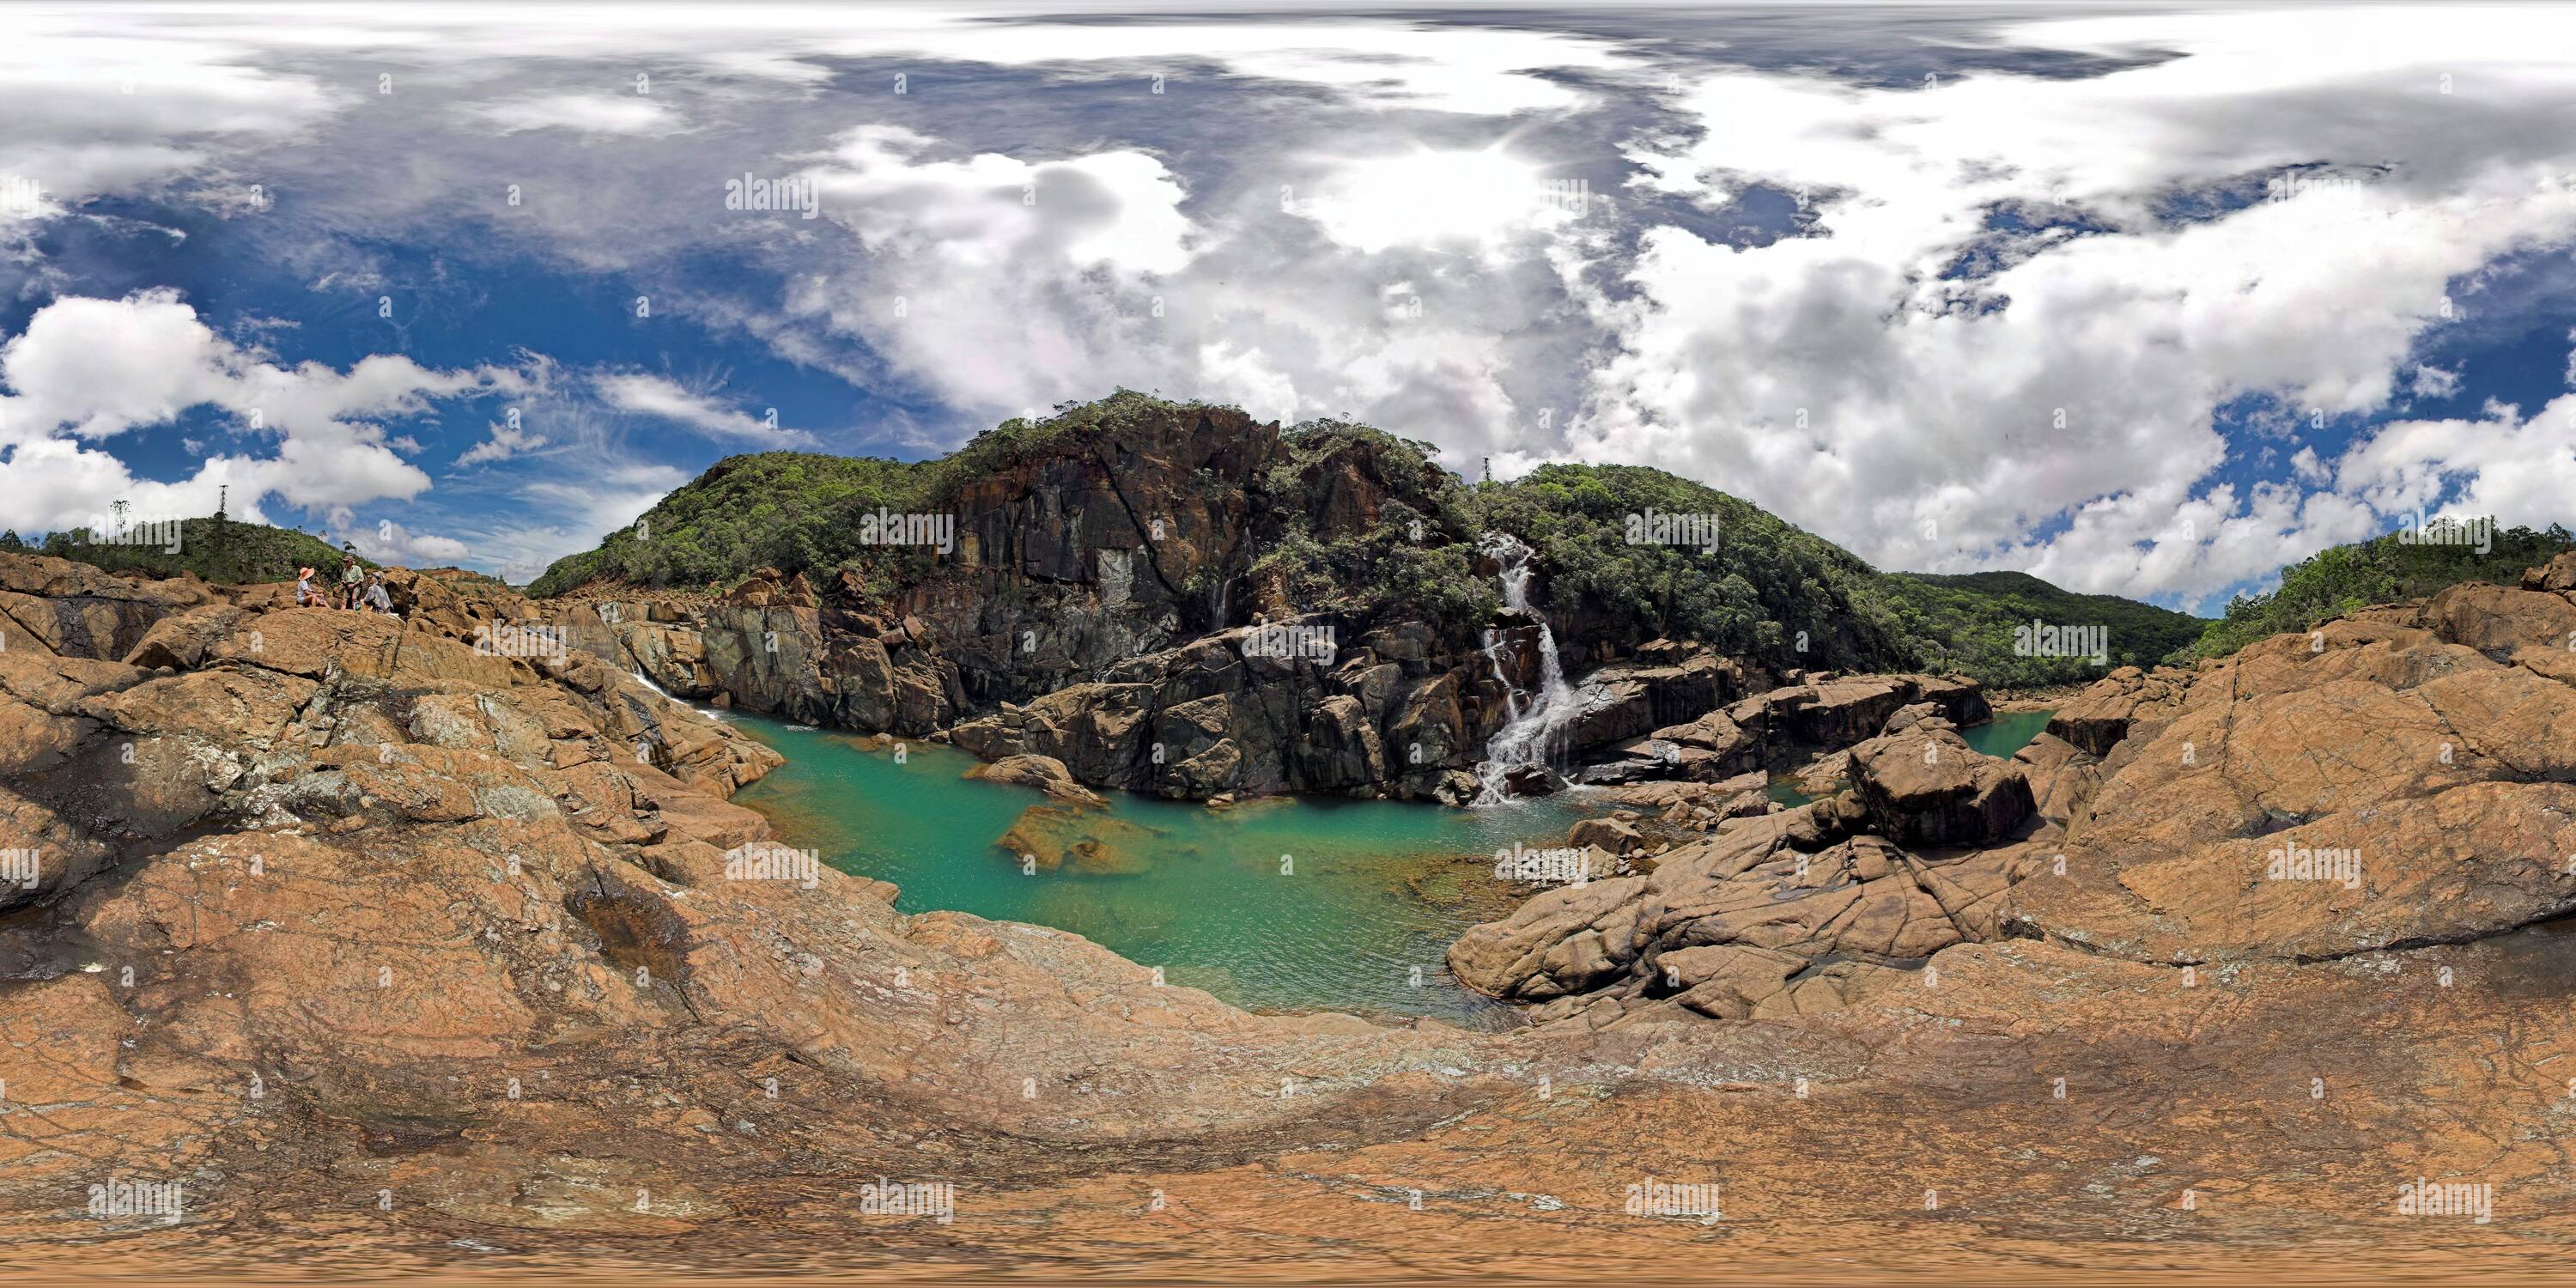 360 degree panoramic view of Yaté River Gorge